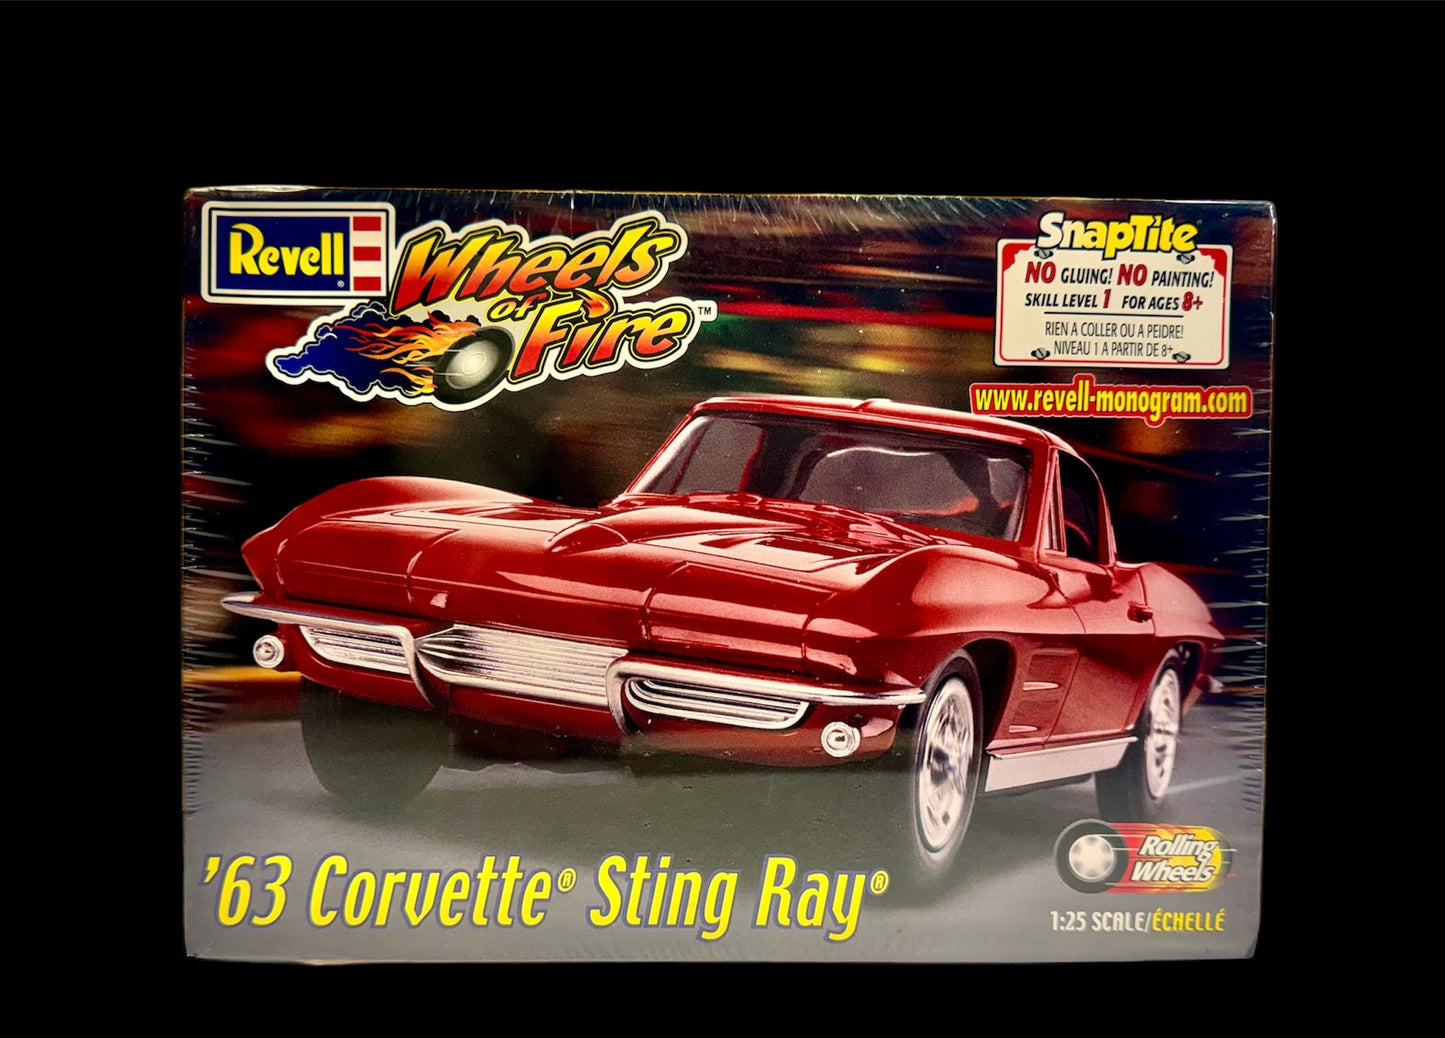 Collectors Lot of (5) 1963 Chevrolet Corvette Stingrays 1:24 All Factory Sealed